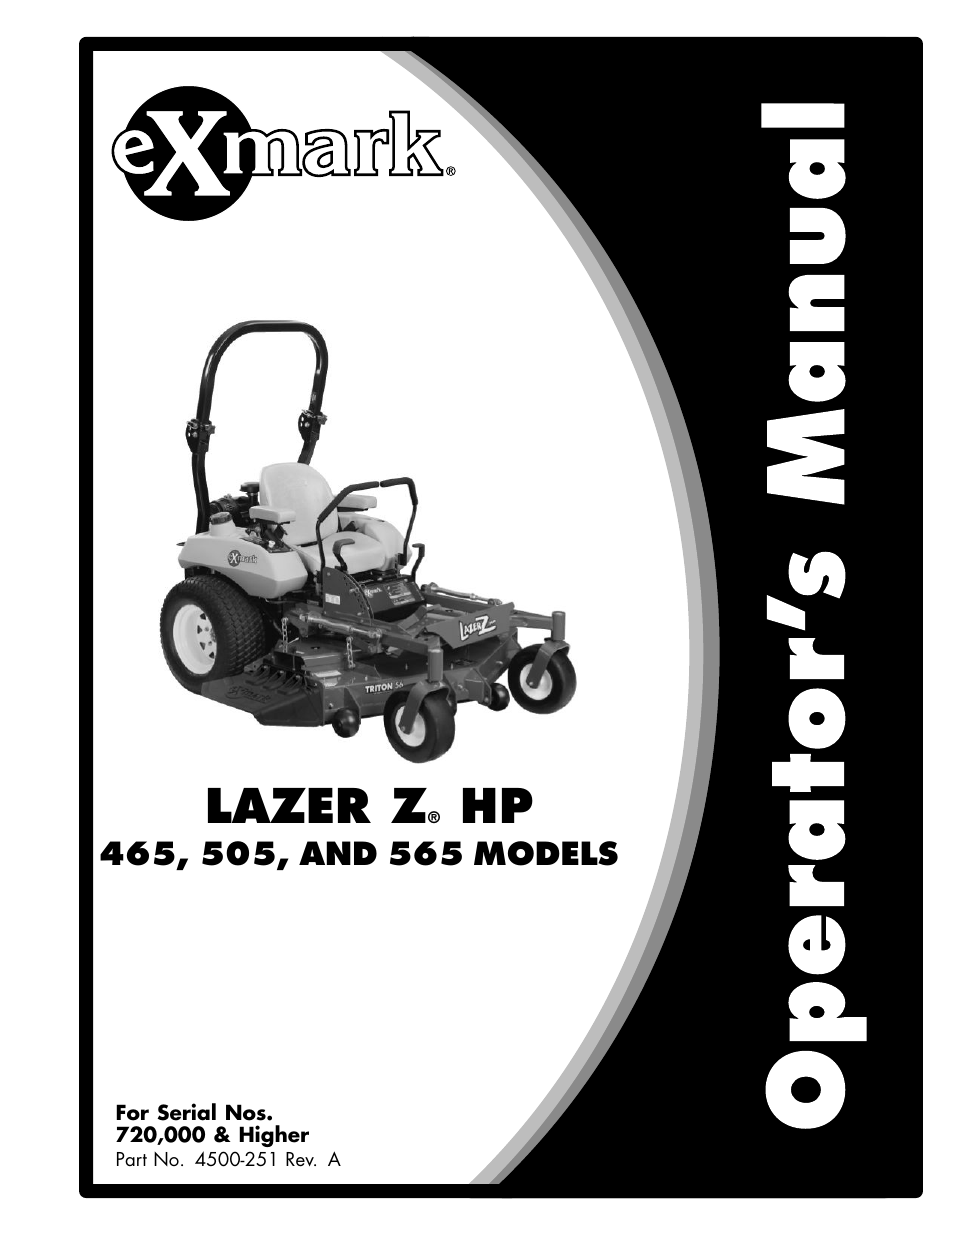 Exmark Lazer Z HP 565 User Manual | 48 pages | Also for: Lazer Z HP 465